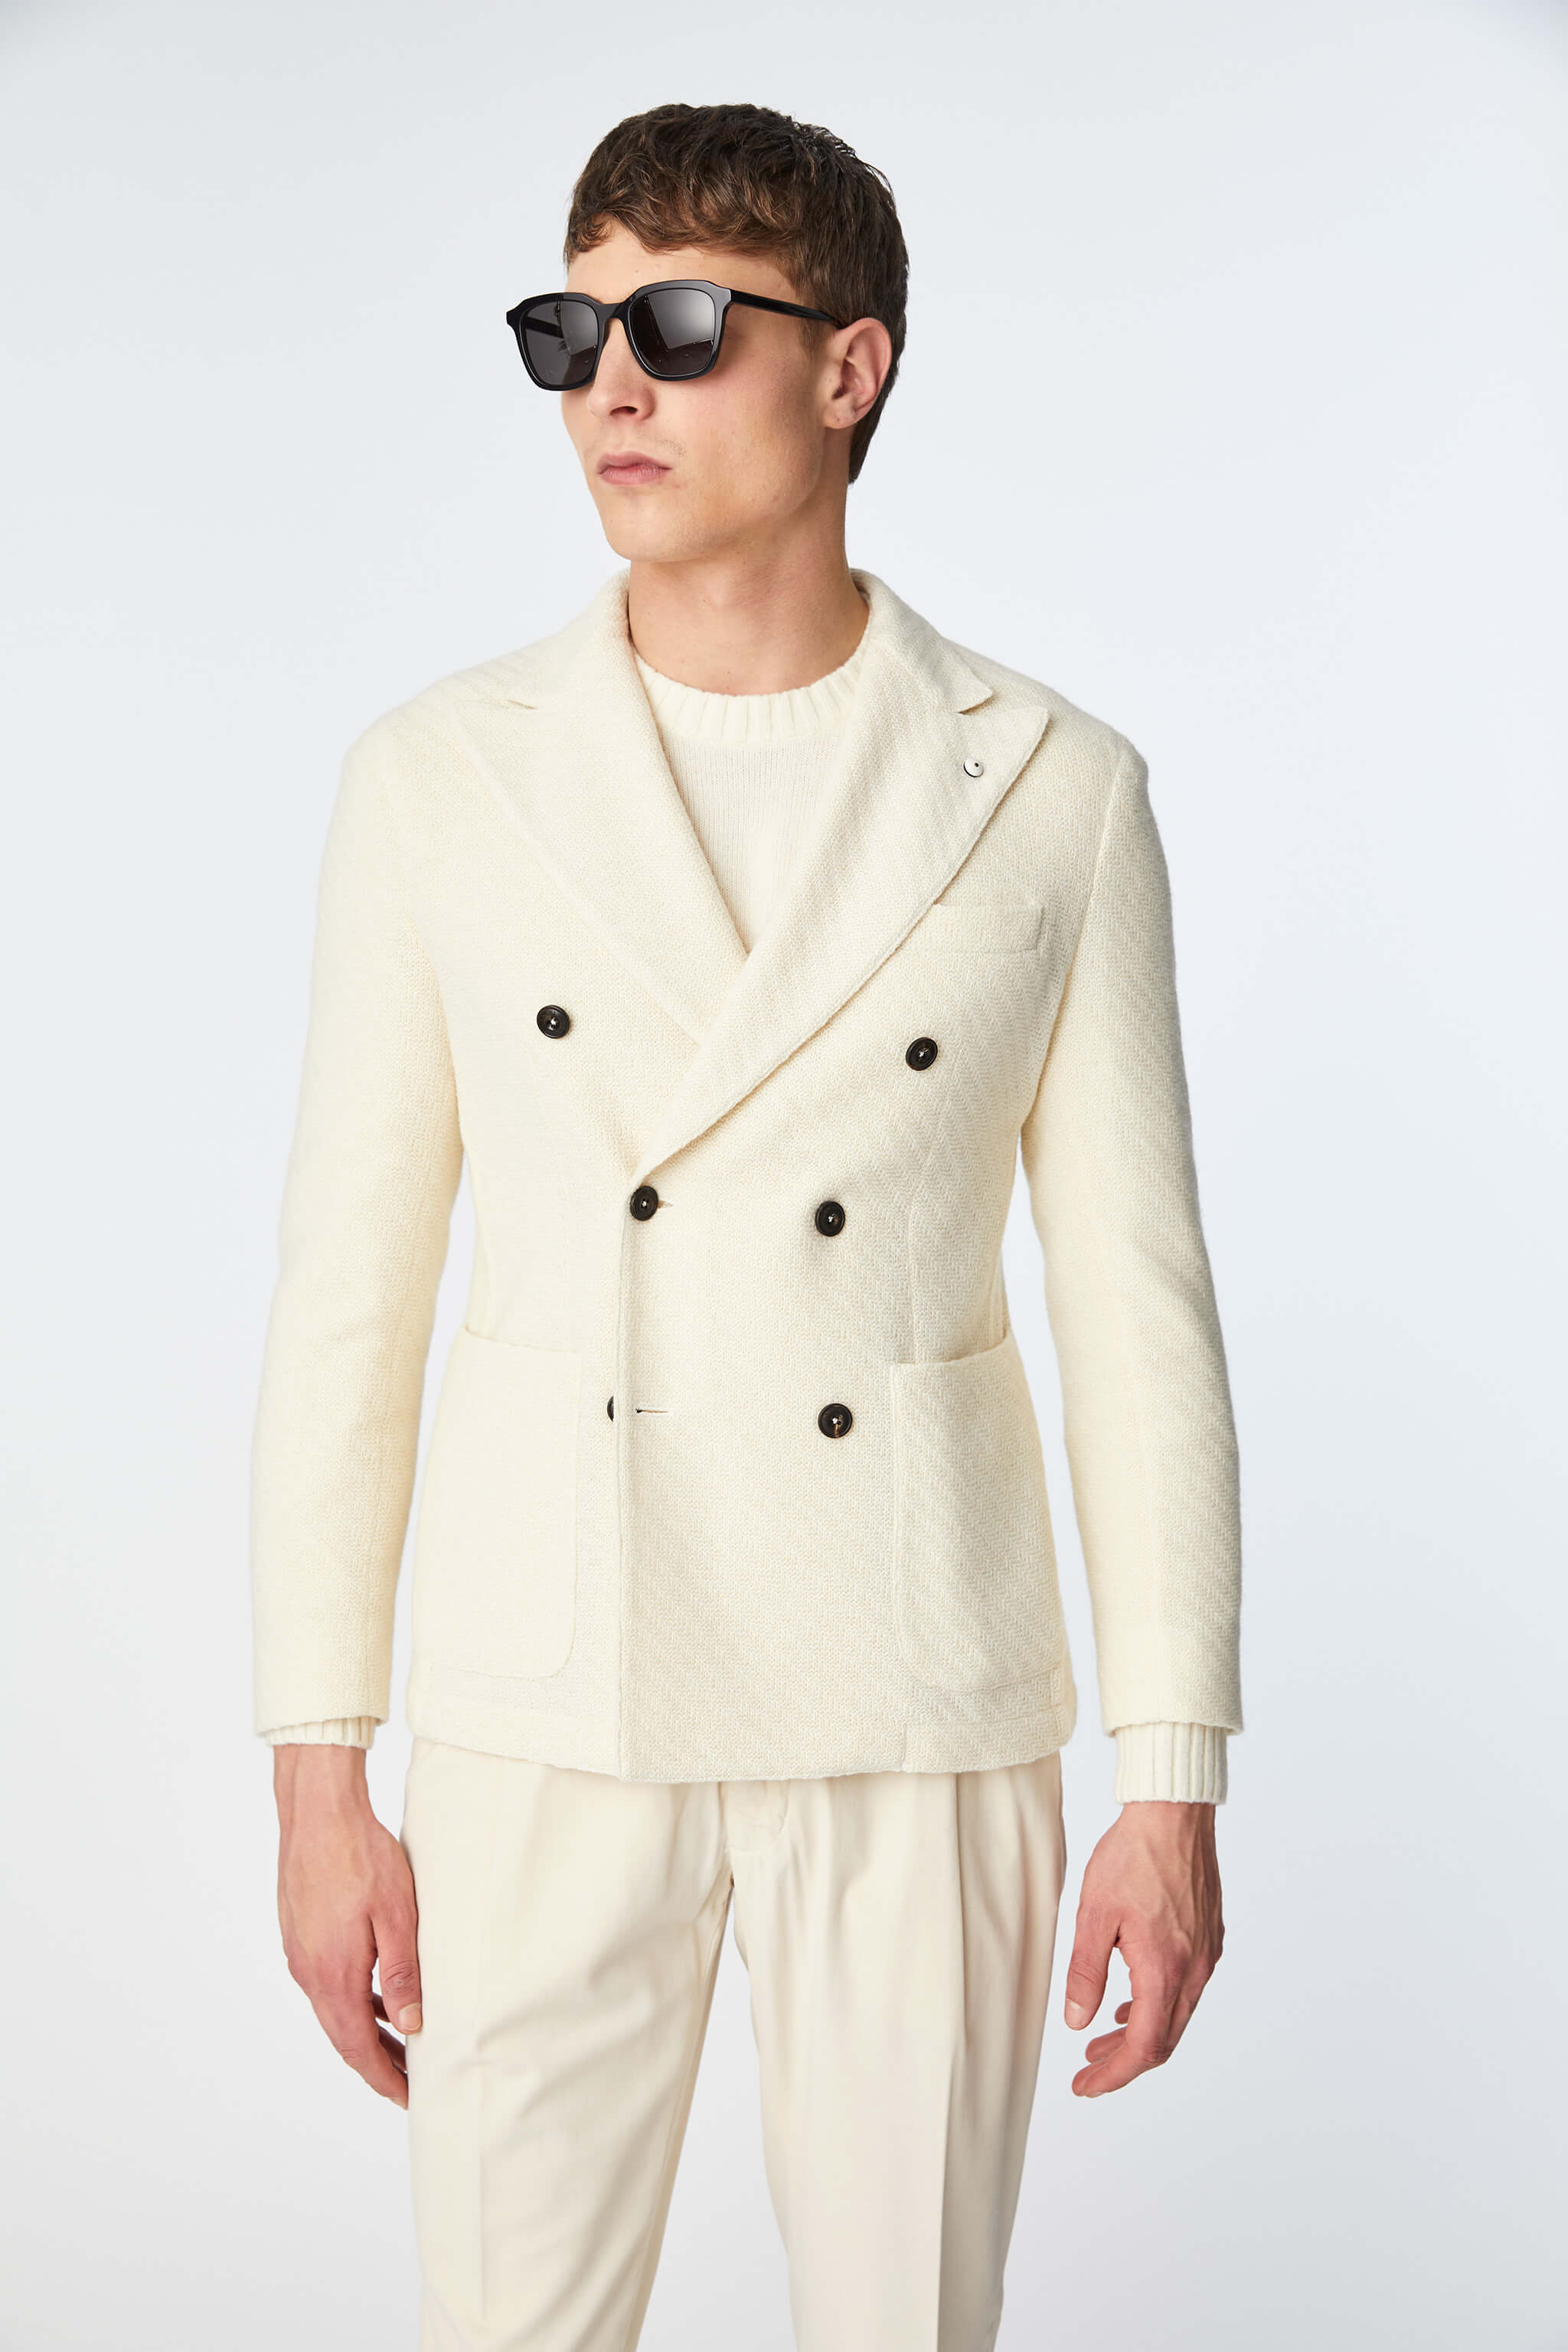 Double-breasted jacket in ivory